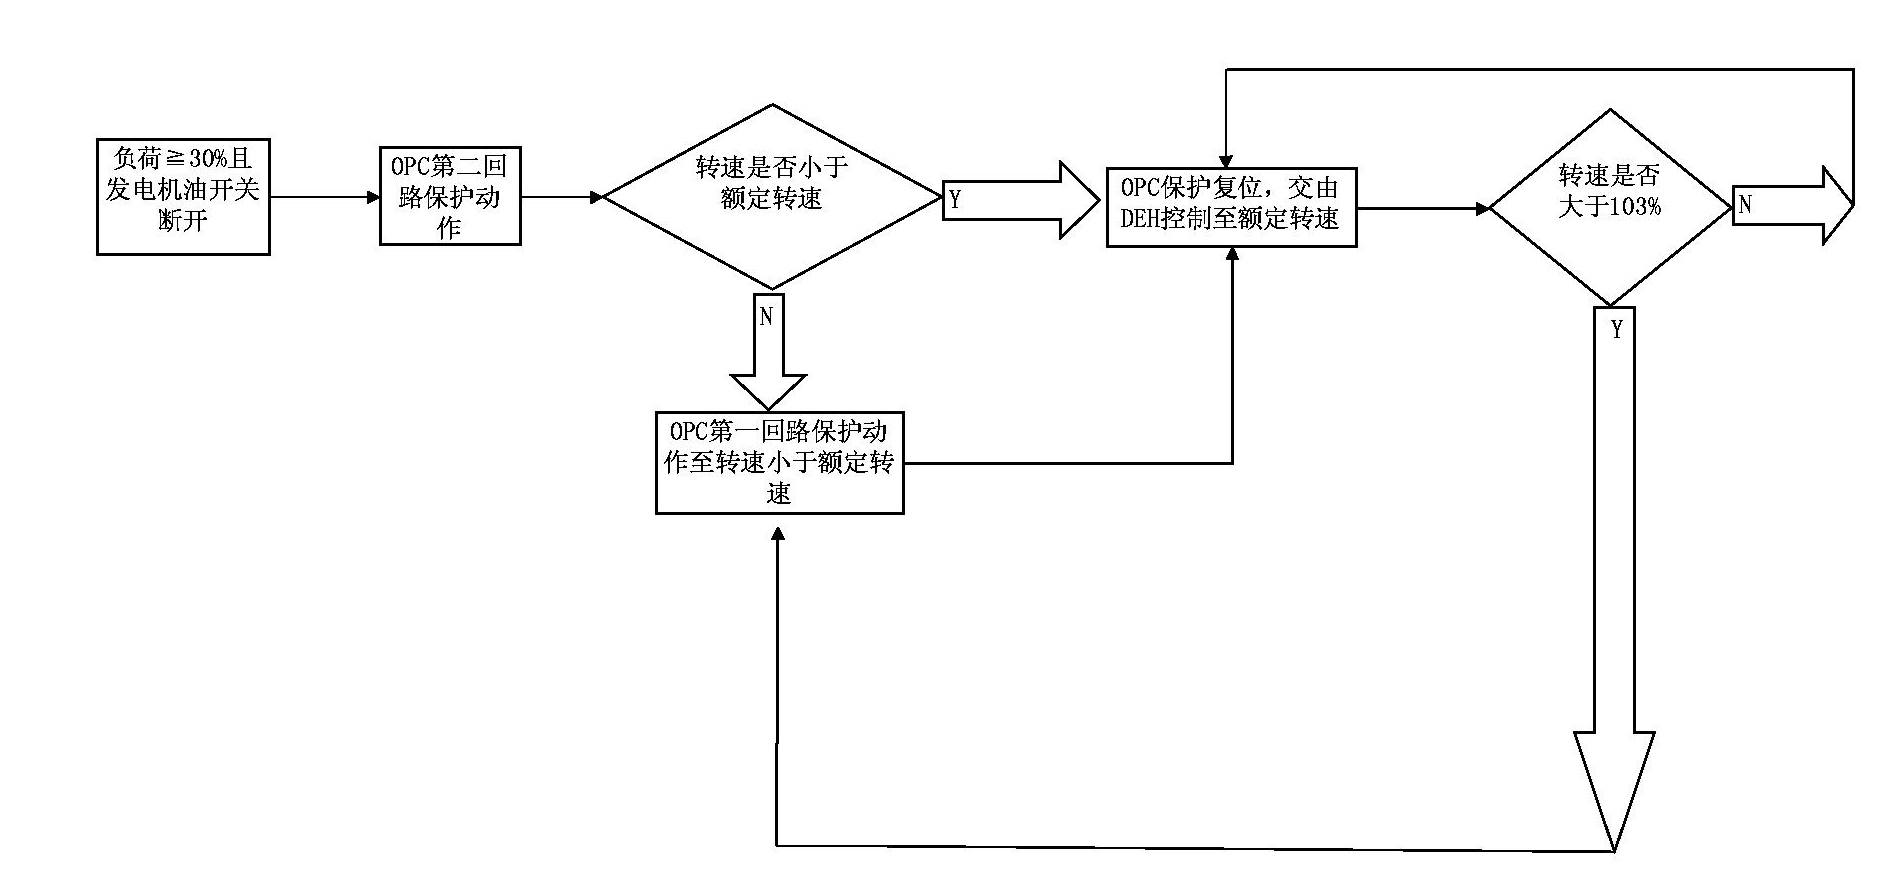 Method for over-speed protection of turbine under load shedding working condition